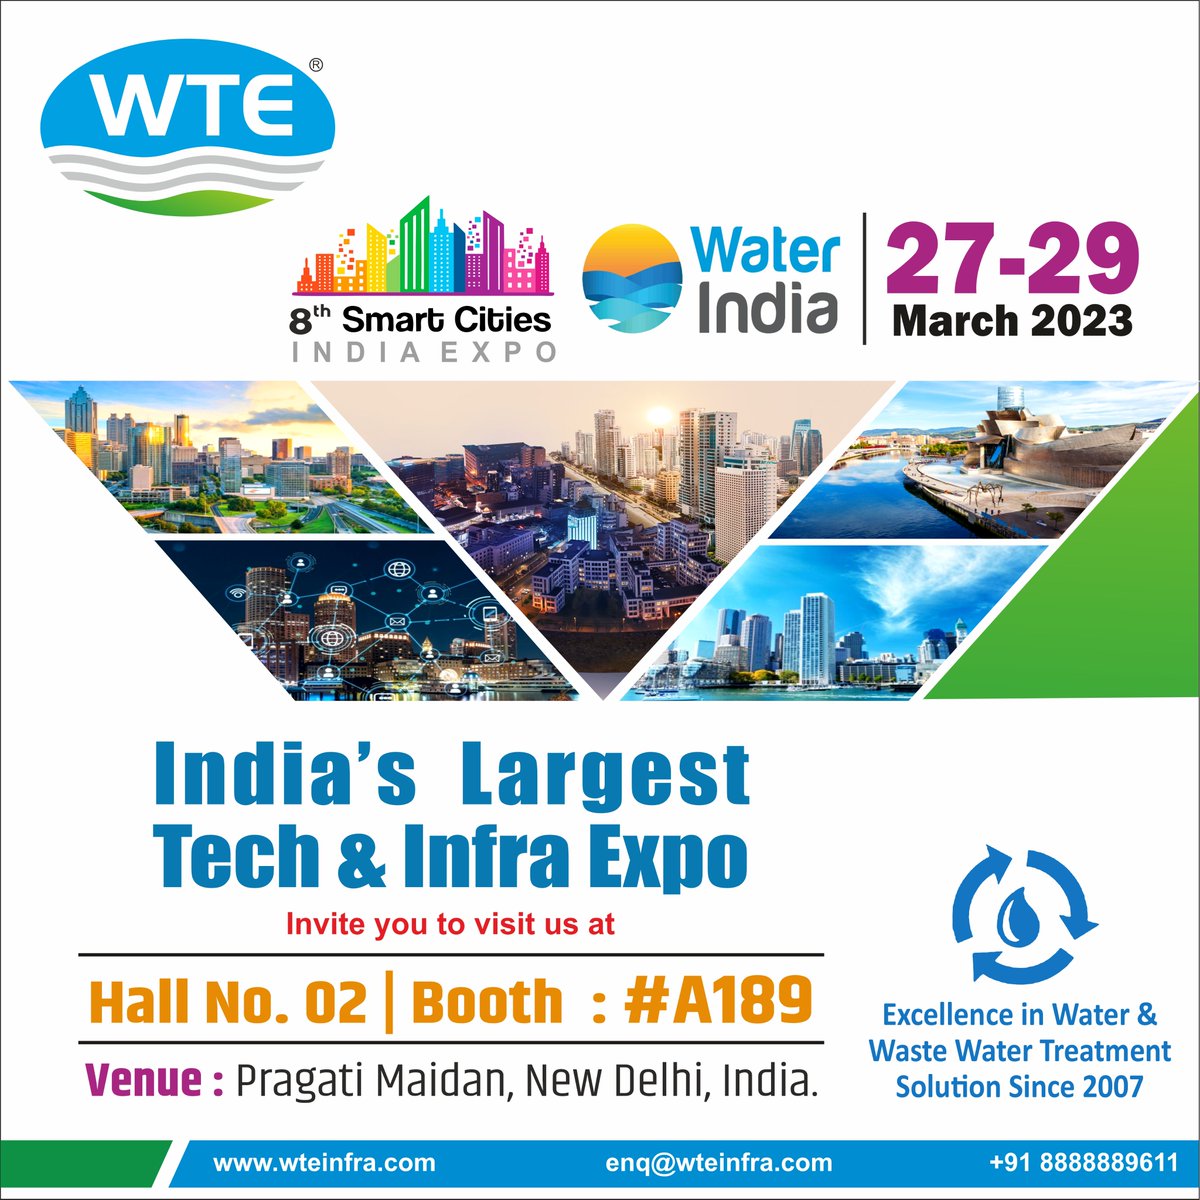 Discover WTE's cutting-edge #WaterAndWasteWater solutions by joining us at 8th Smart Cities India expo! Set a reminder for now.

#WTE #SmartCitiesIndiaExpo #SmartCitiesIndia #WaterIndia #WaterTreatmentSystems #SustainableSolutions #NewDelhi #India #Water #Environment #Sustainable